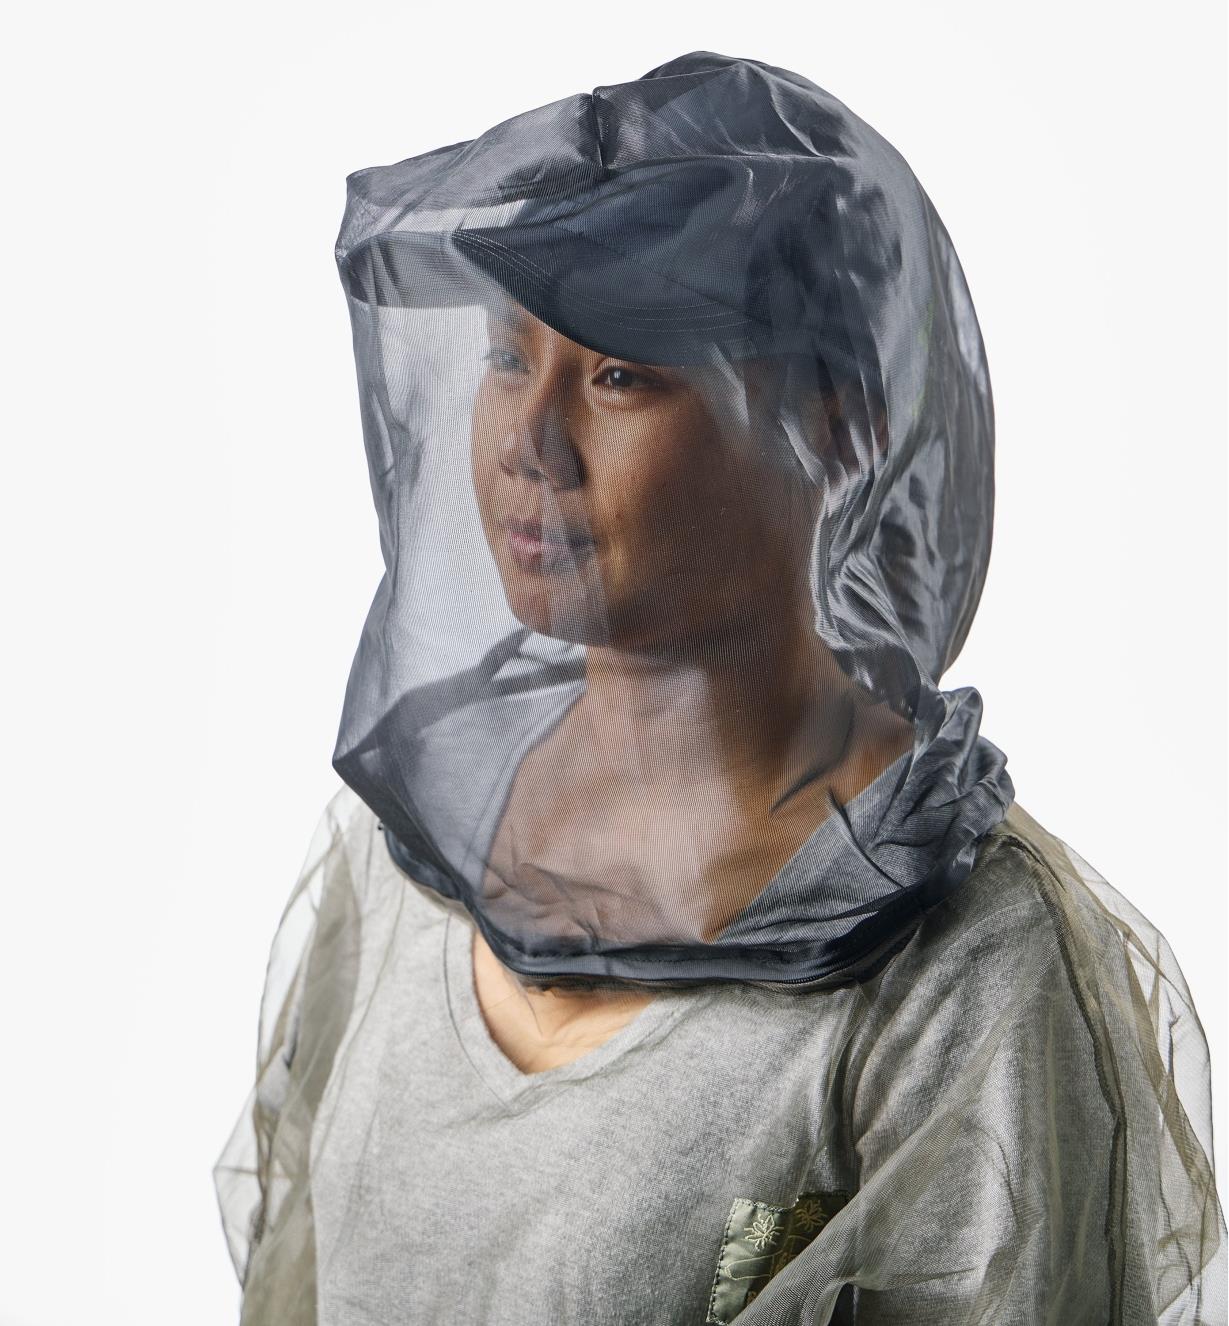 A woman wears a hooded bug-protection shirt with a baseball cap underneath